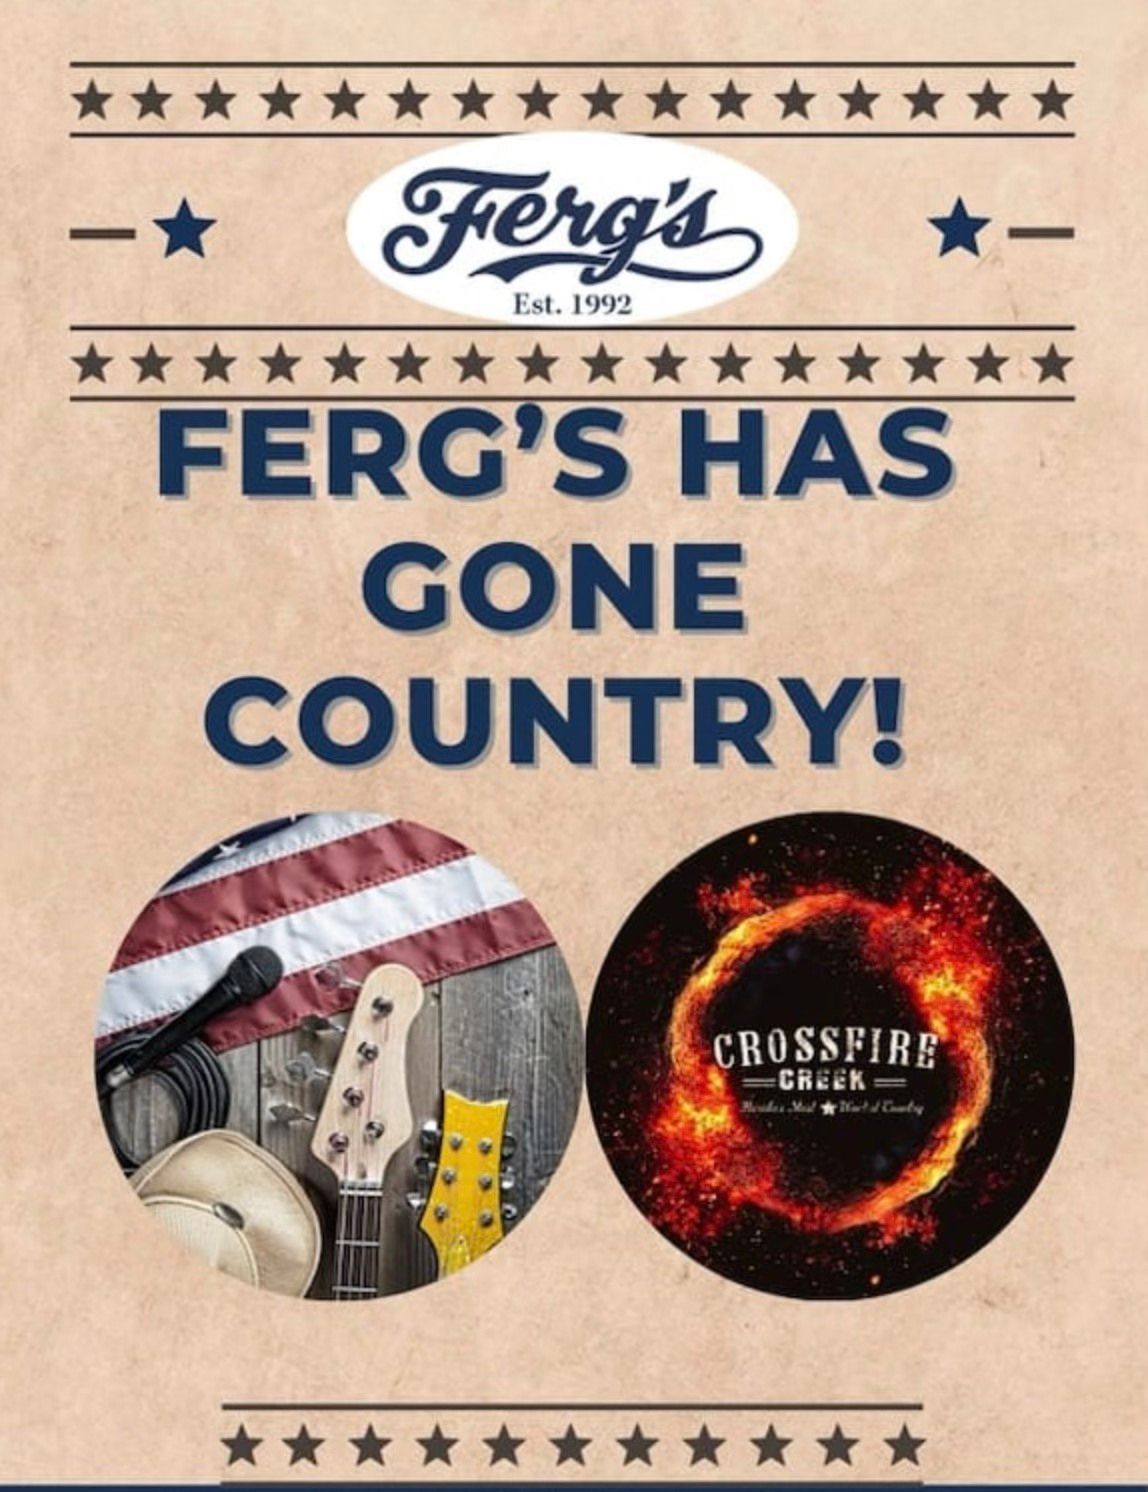 Ferg's Sports Bar | Crossfire Creek (New Country Band)